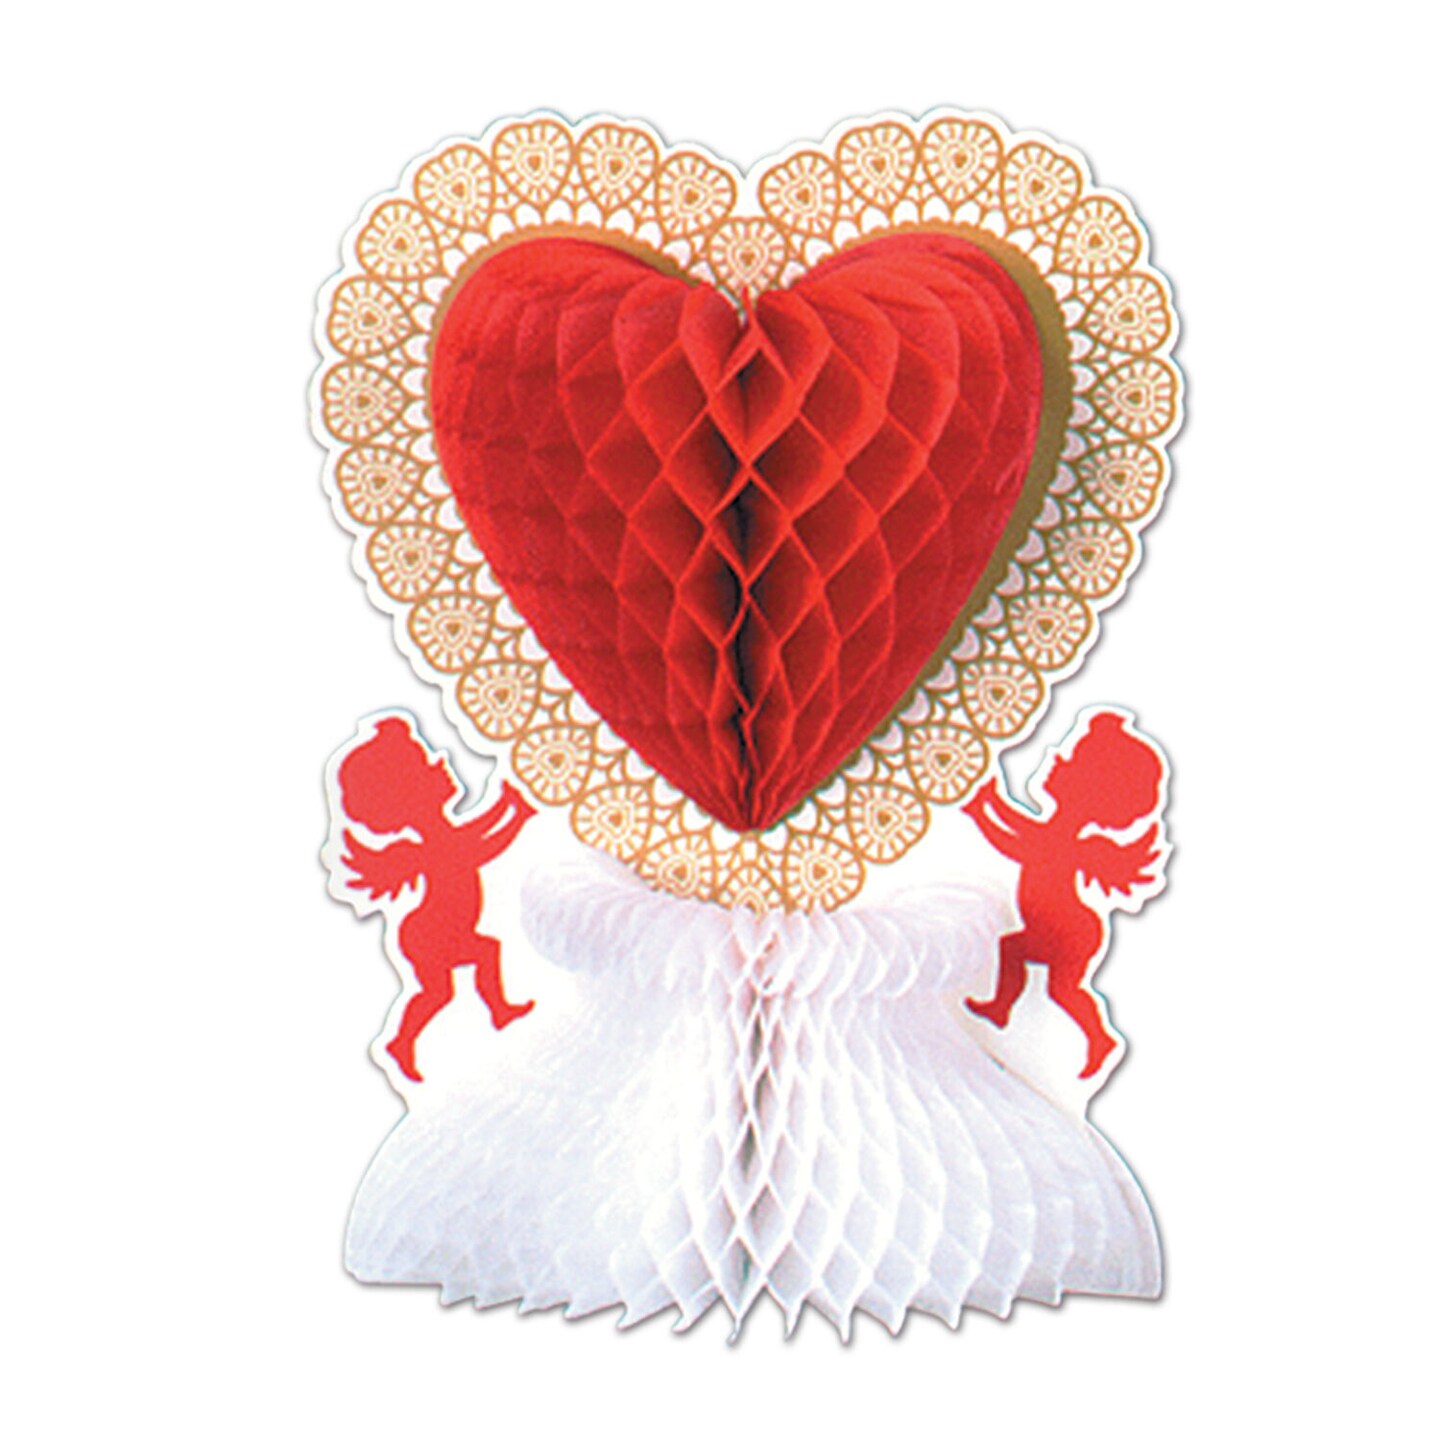 Vintage Inspired Cupid and Heart Centerpiece Honeycomb Decor